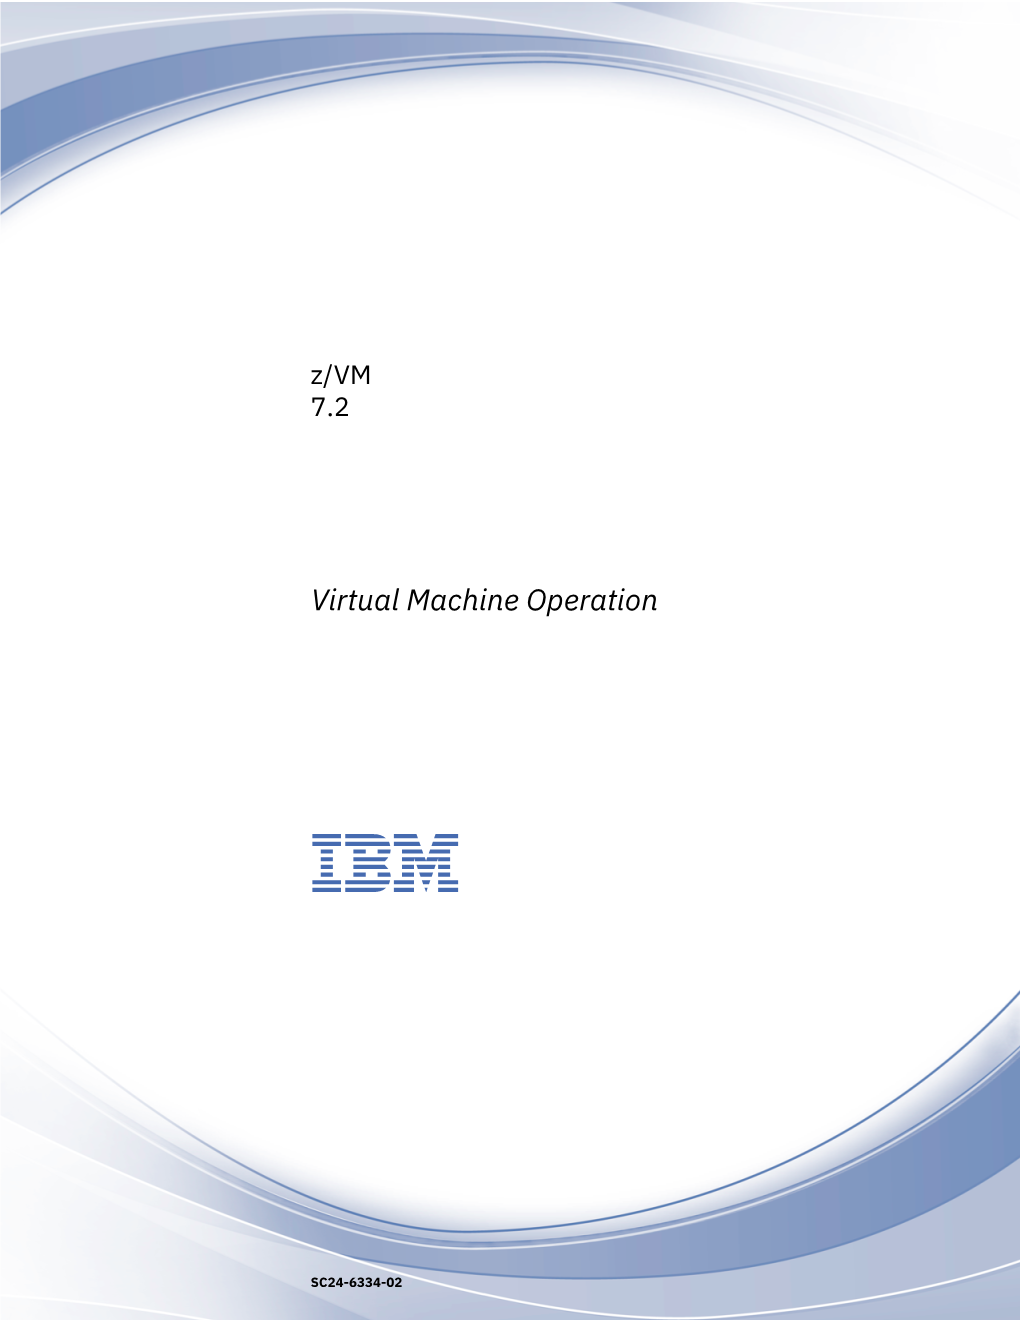 Z/VM: 7.2 Virtual Machine Operation How to Send Your Comments to IBM